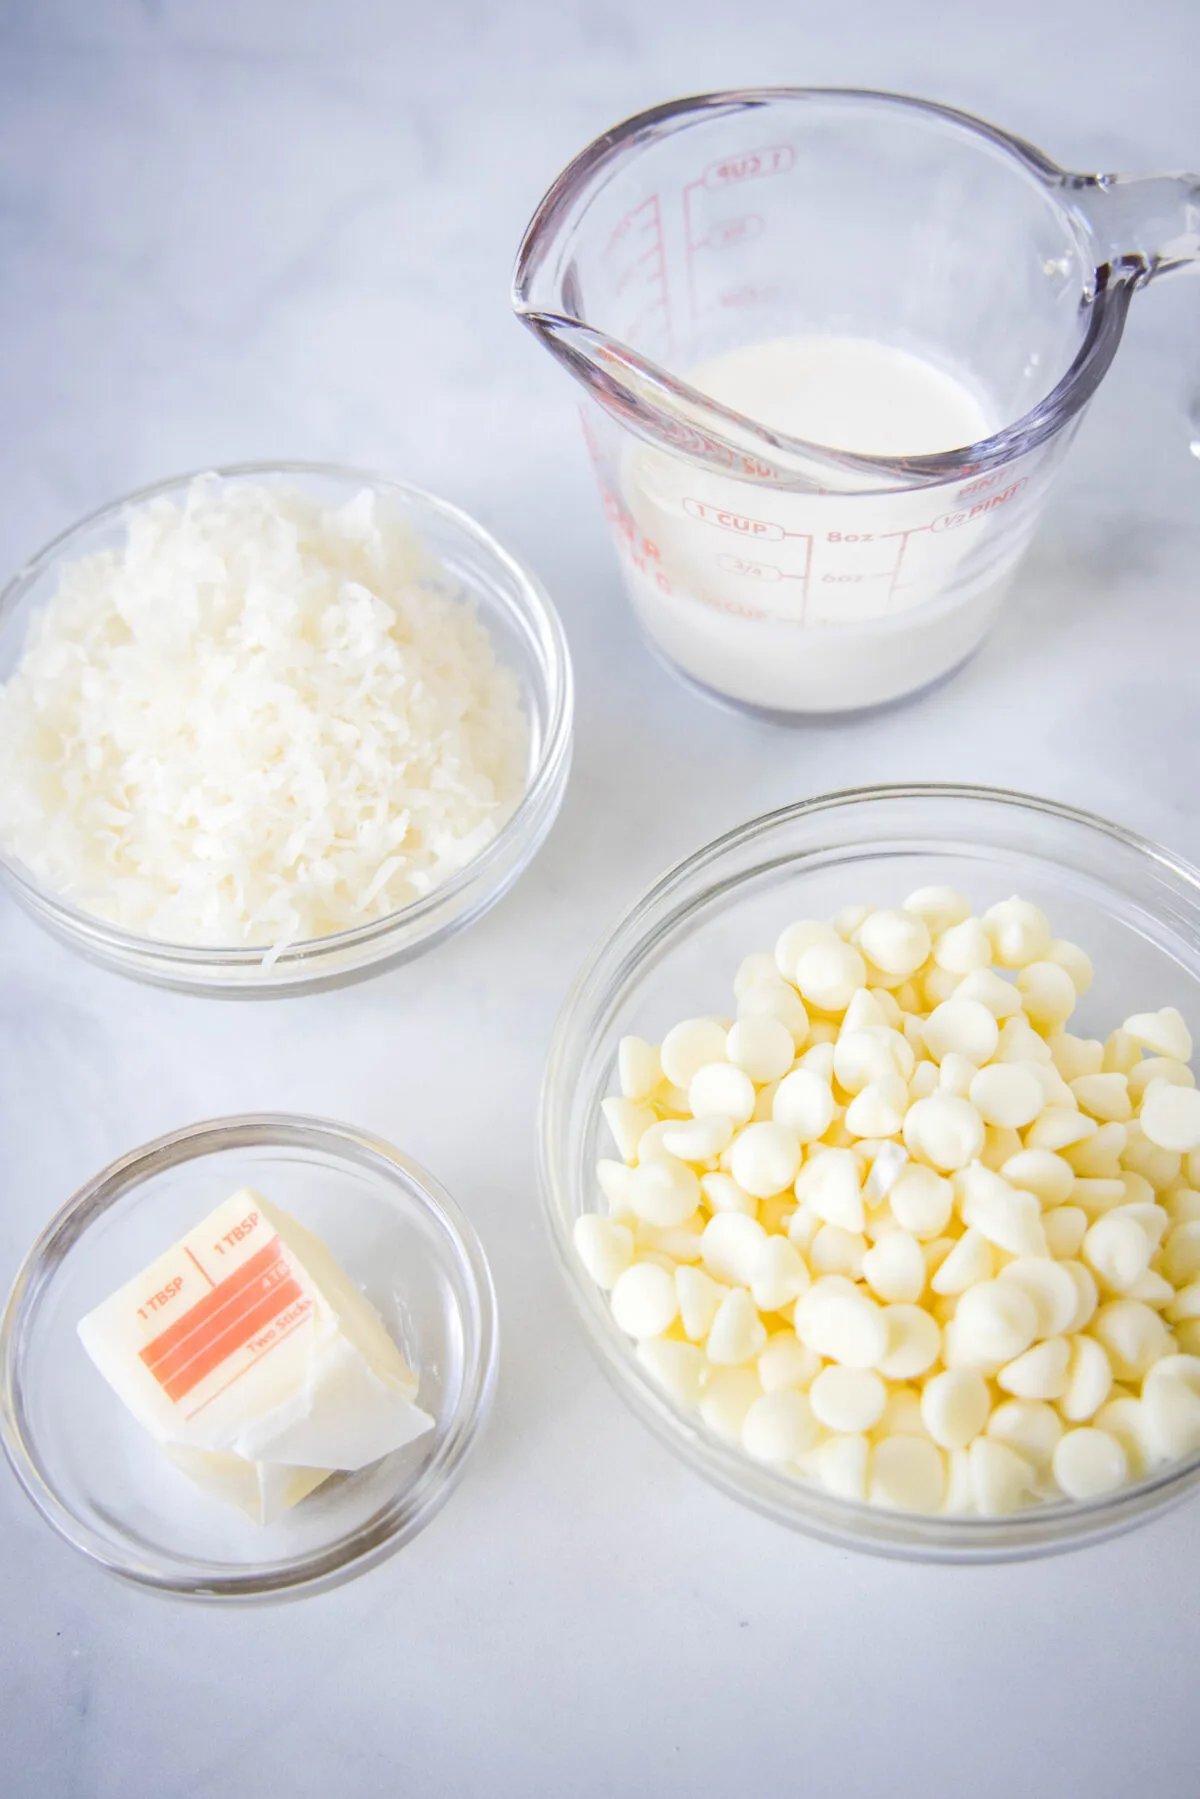 Overhead view of some of the ingredients needed for coconut balls: a bowl of white chocolate chips, a pyrex of heavy cream, a bowl of shredded coconut, and some butter